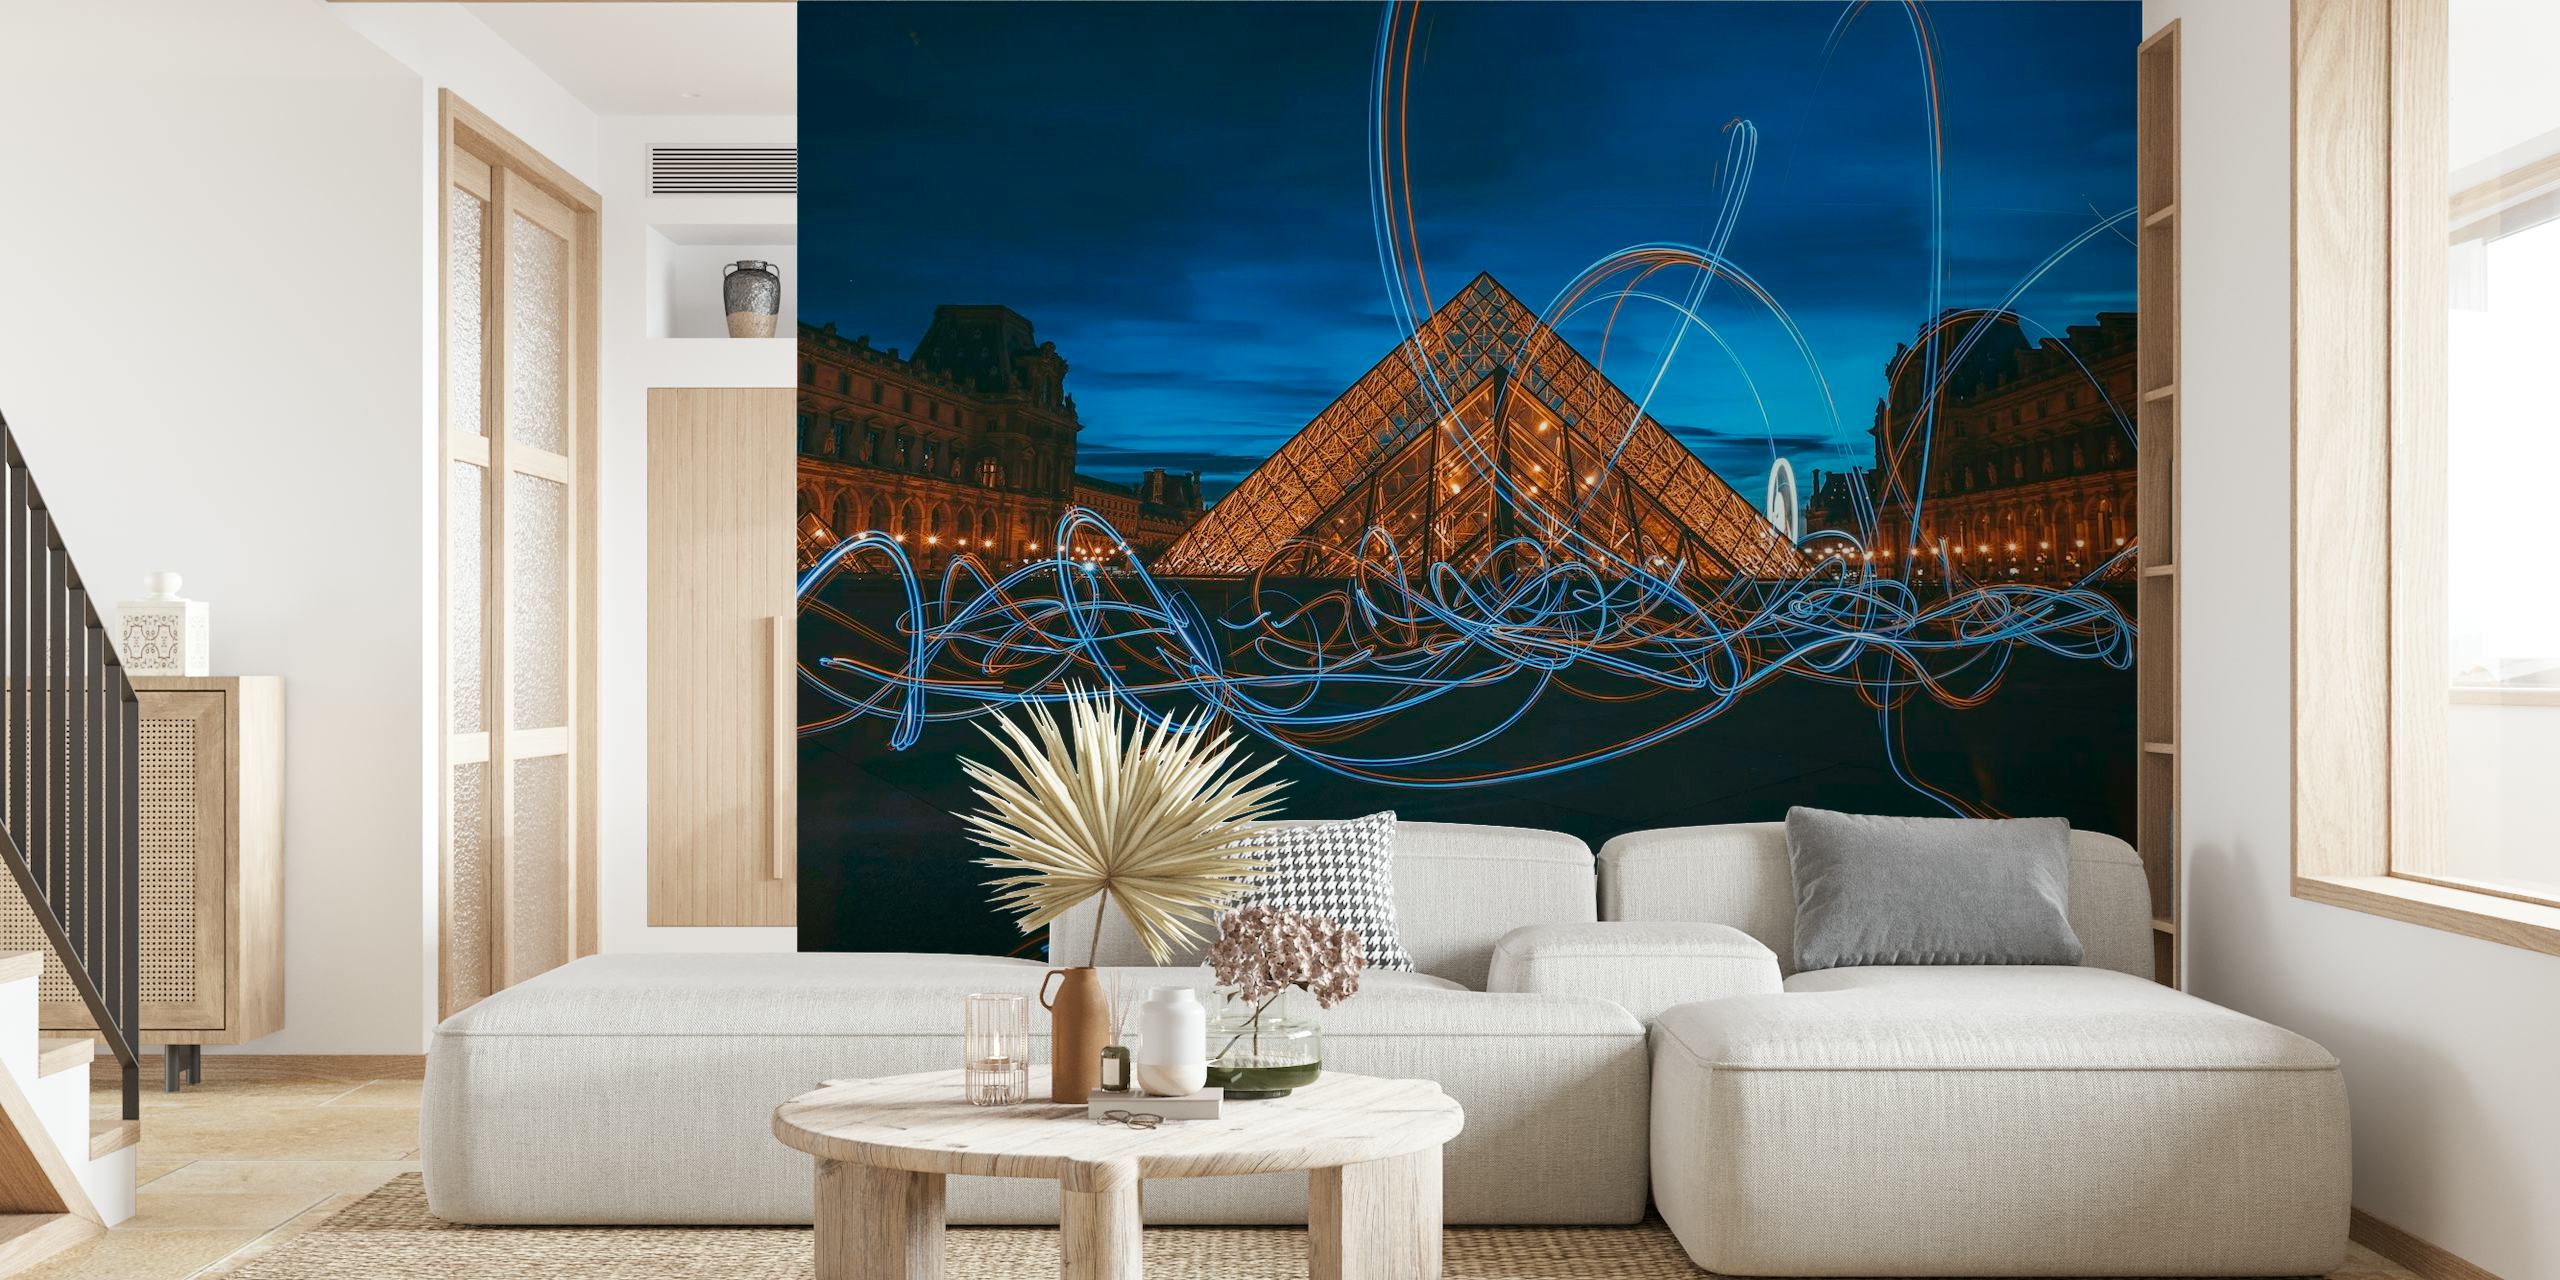 Light painting at Louvre Museum behang